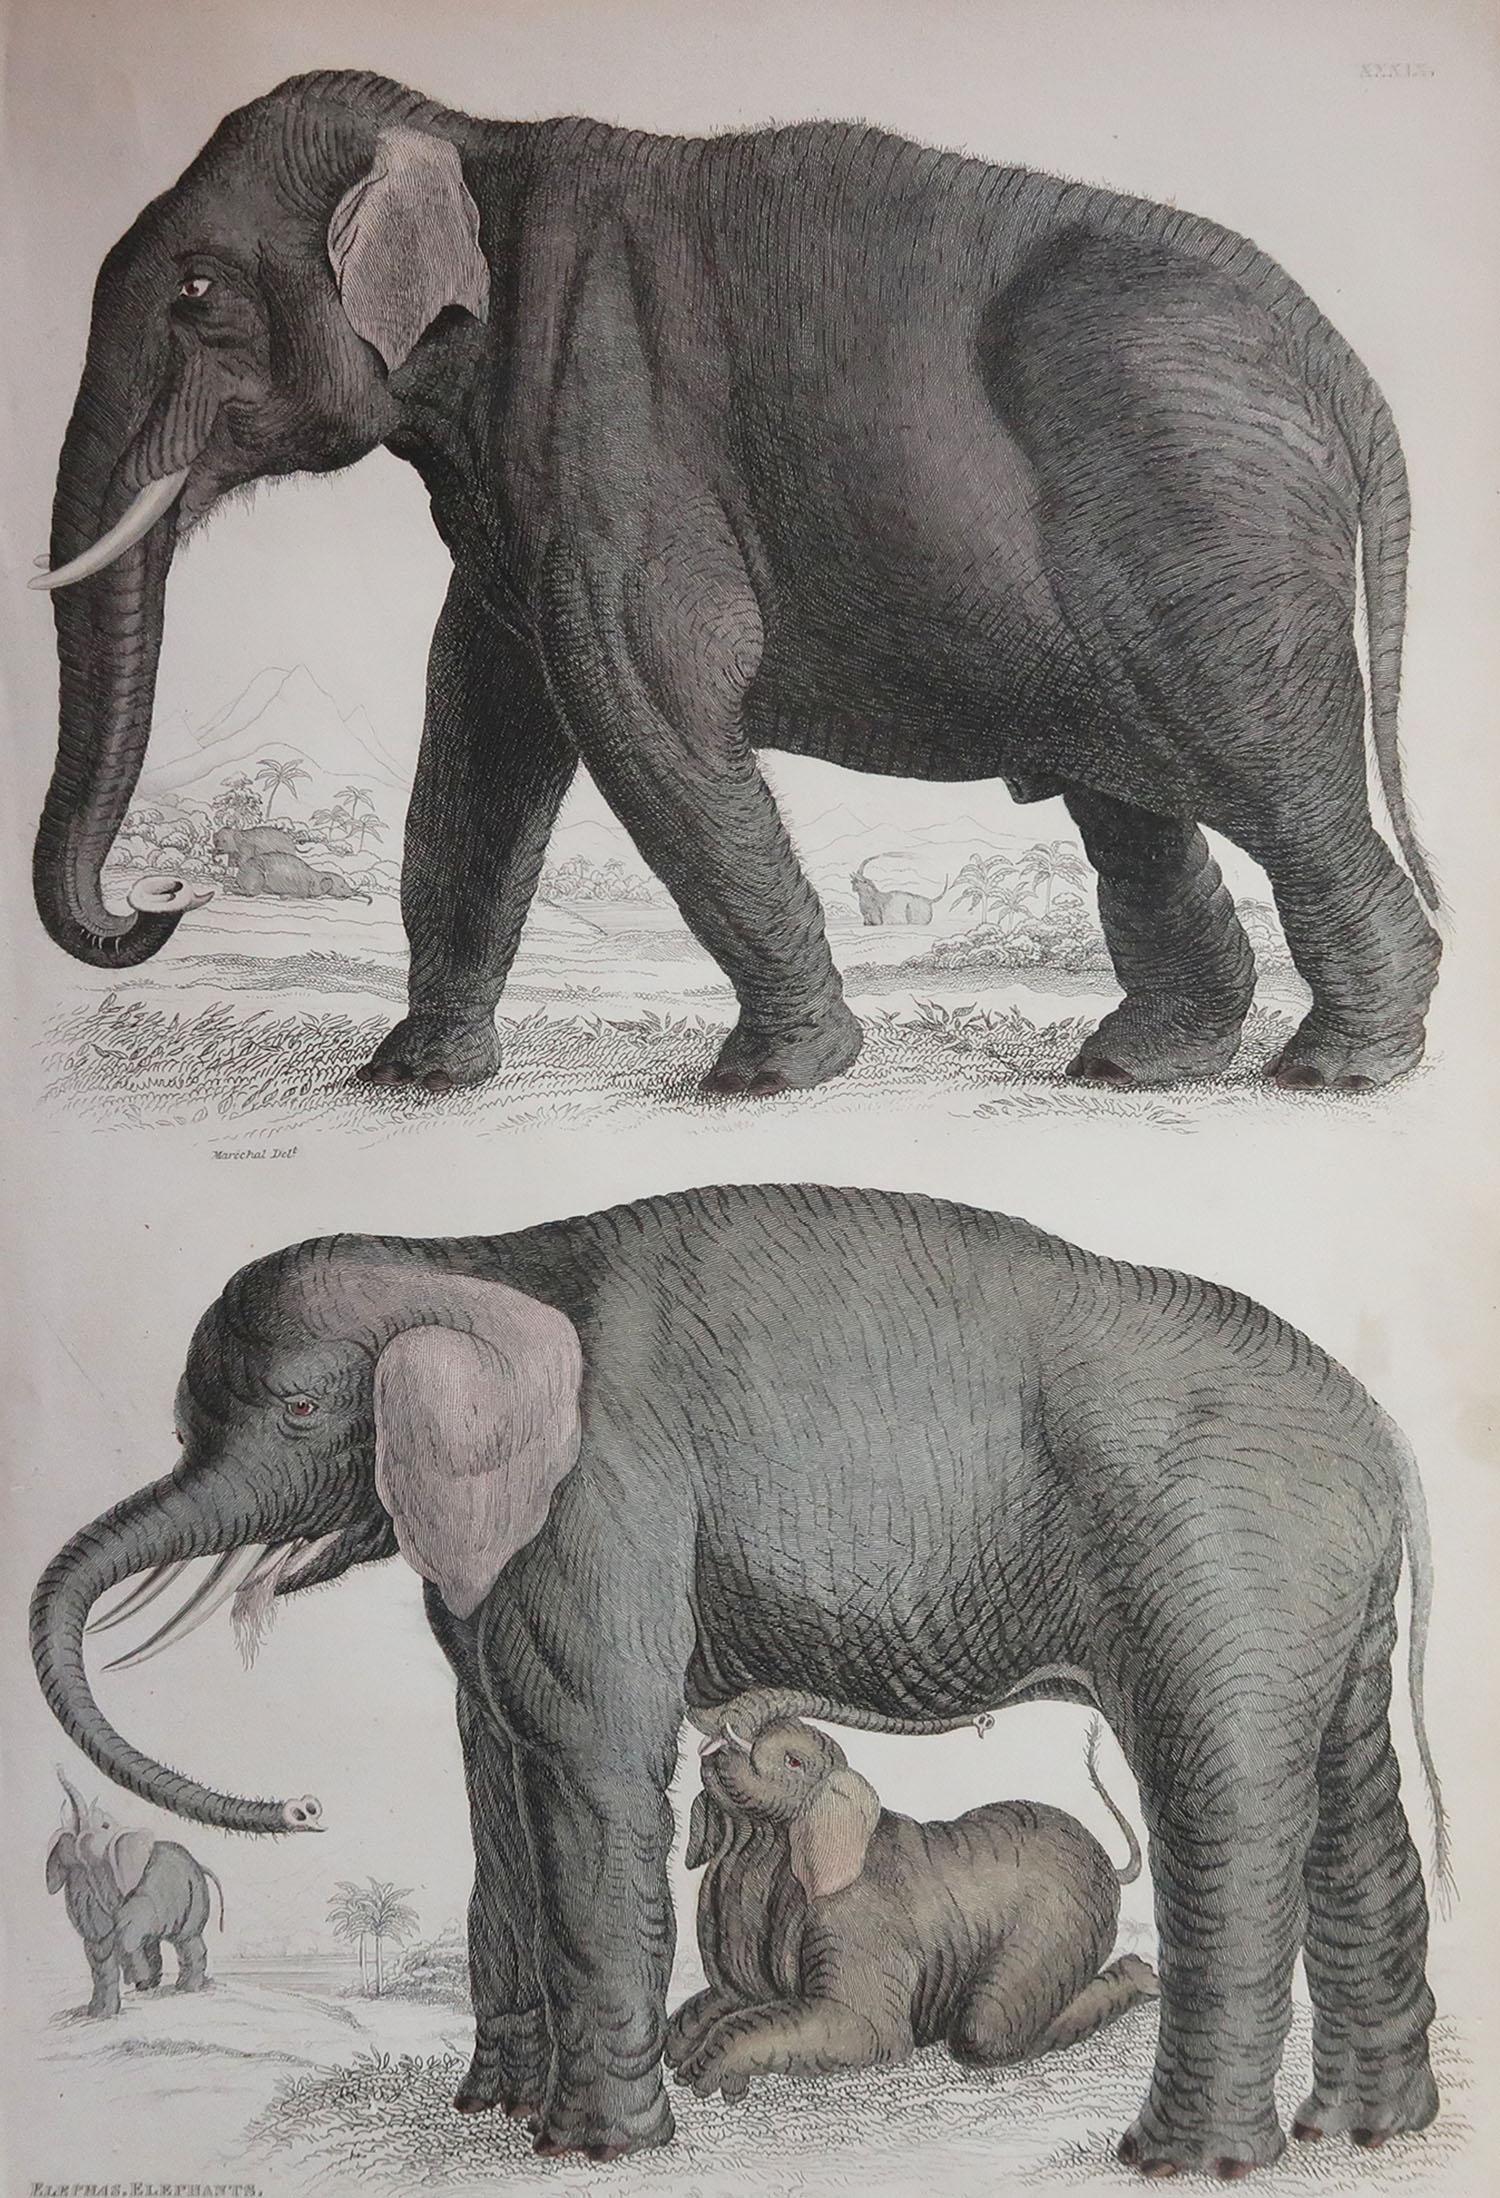 Great image of an Indian and an African elephant

Unframed. It gives you the option of perhaps making a set up using your own choice of frames.

Lithograph after Cpt. Brown with original hand color.

Published circa 1835

Free